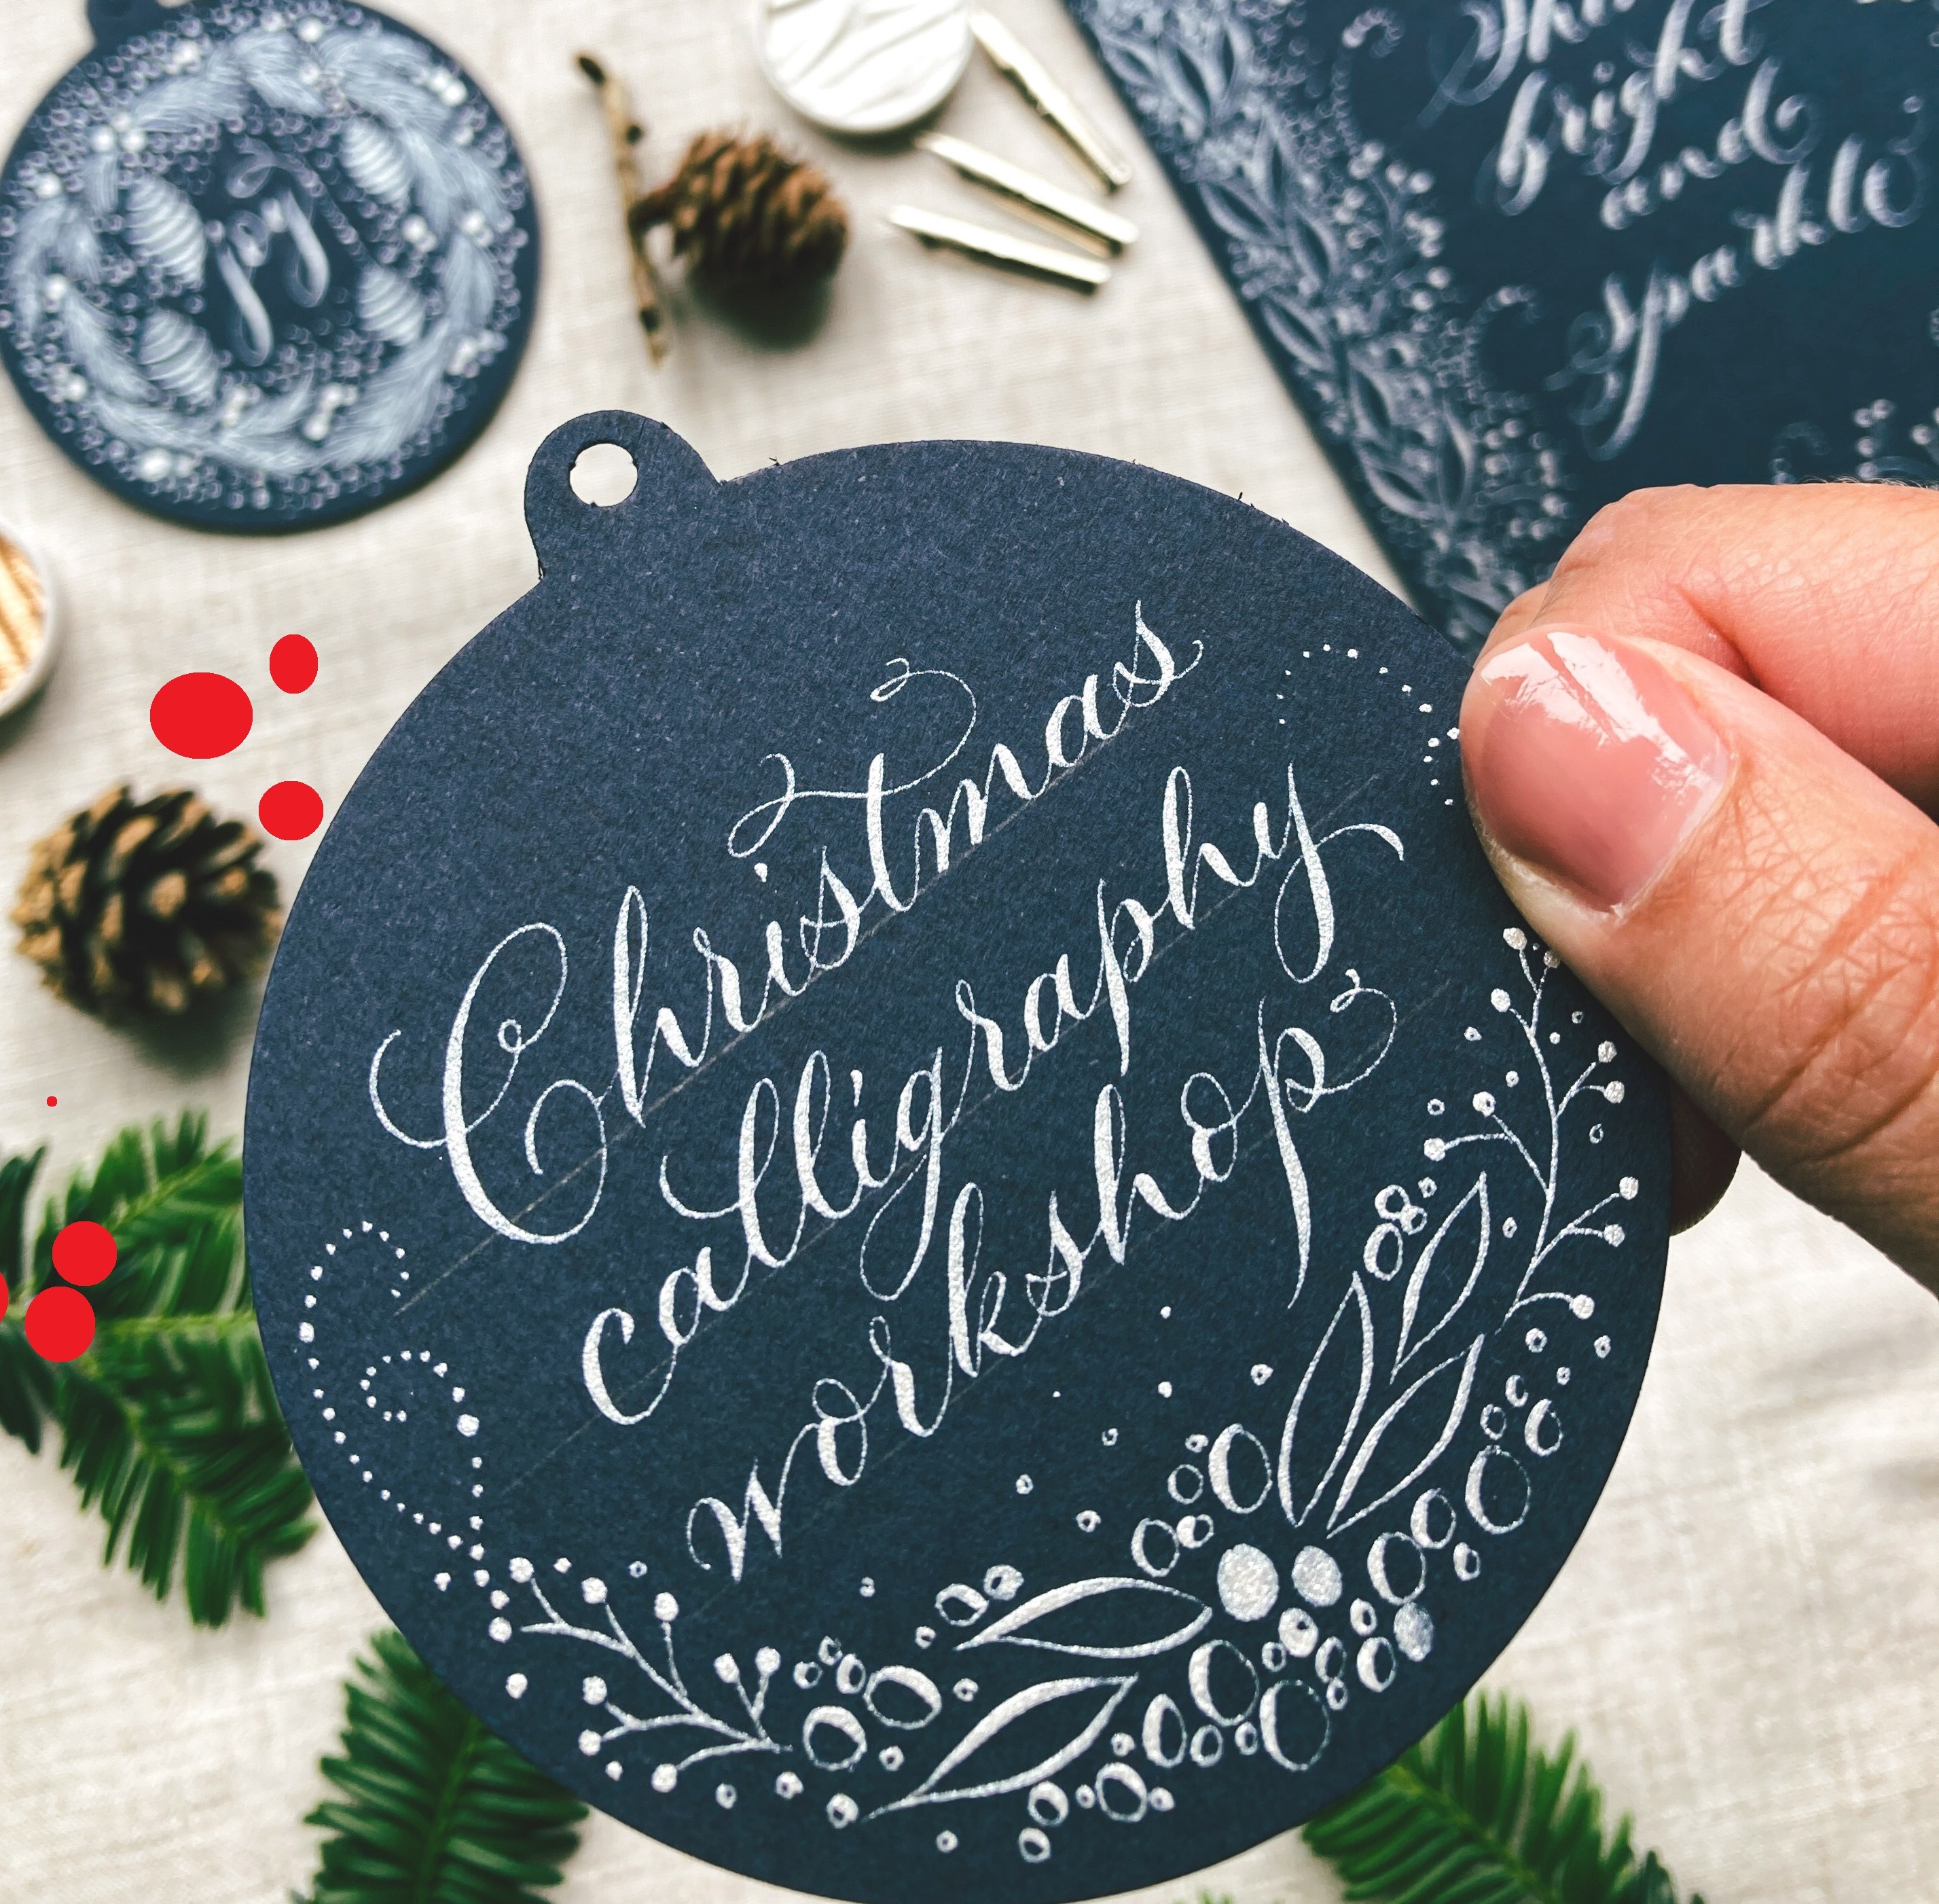 Christmas Calligraphy Workshop in Cumbria, the Lake District